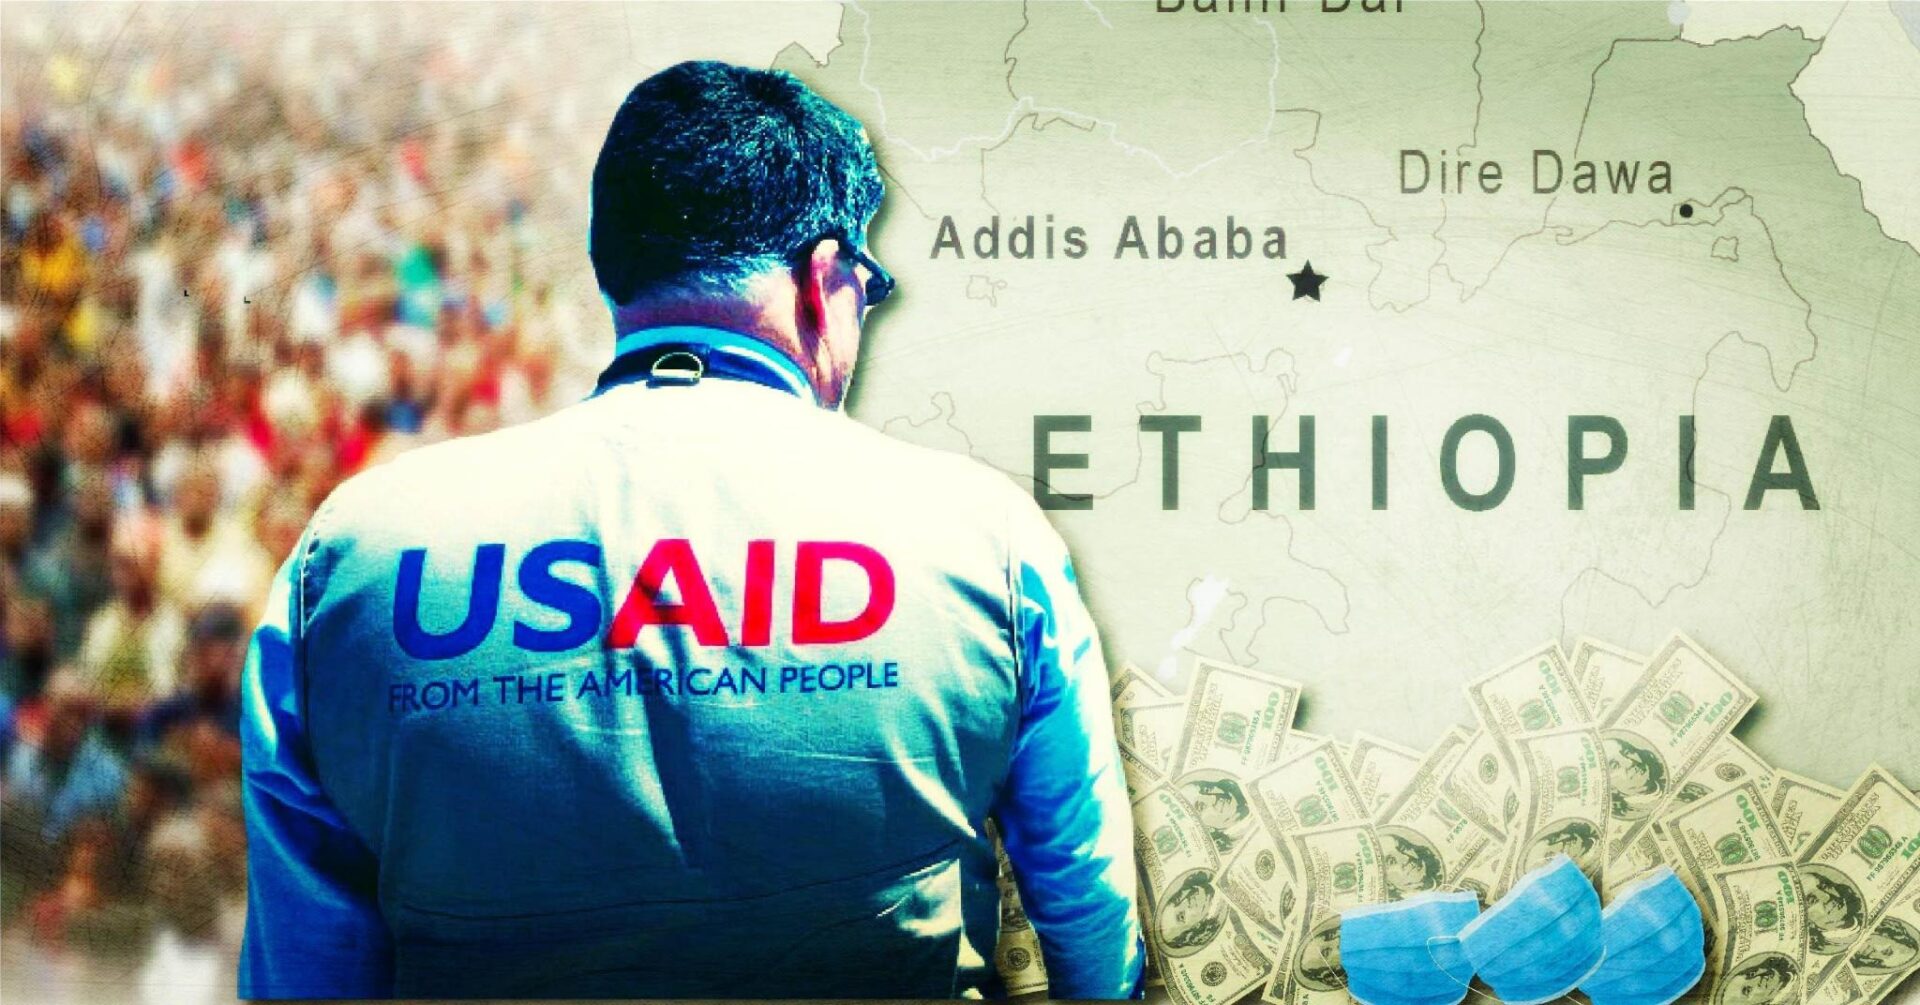 Leaked Documents Expose How USAID Disguised Millions in COVID Relief to Fund Population Control, Abortion - Revolver News